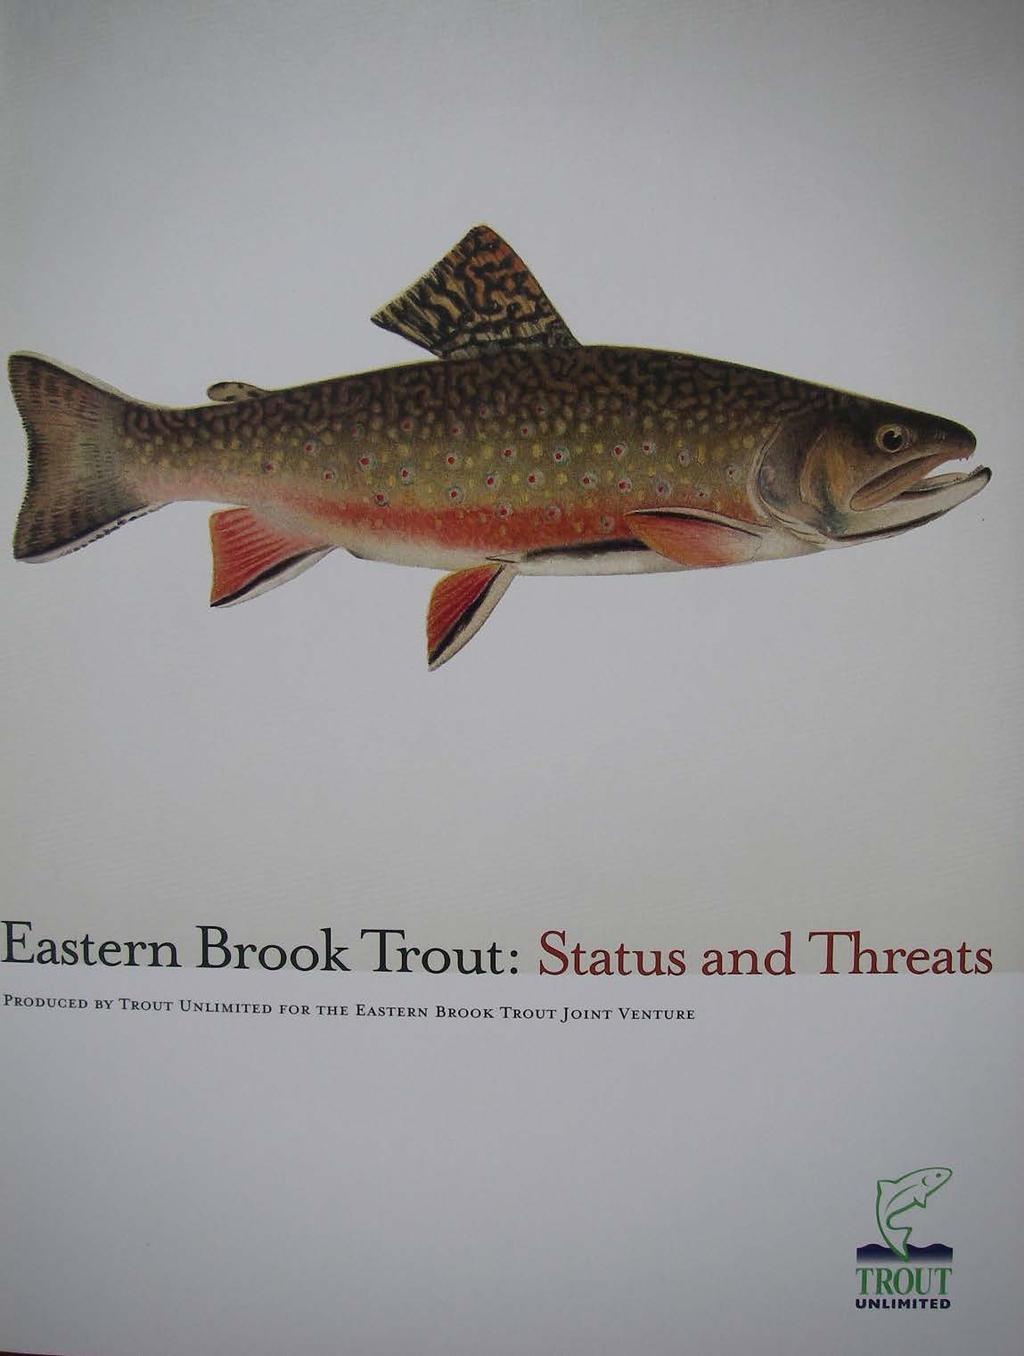 Eastern Brook Trout Joint Venture 2006 Maine is the last true